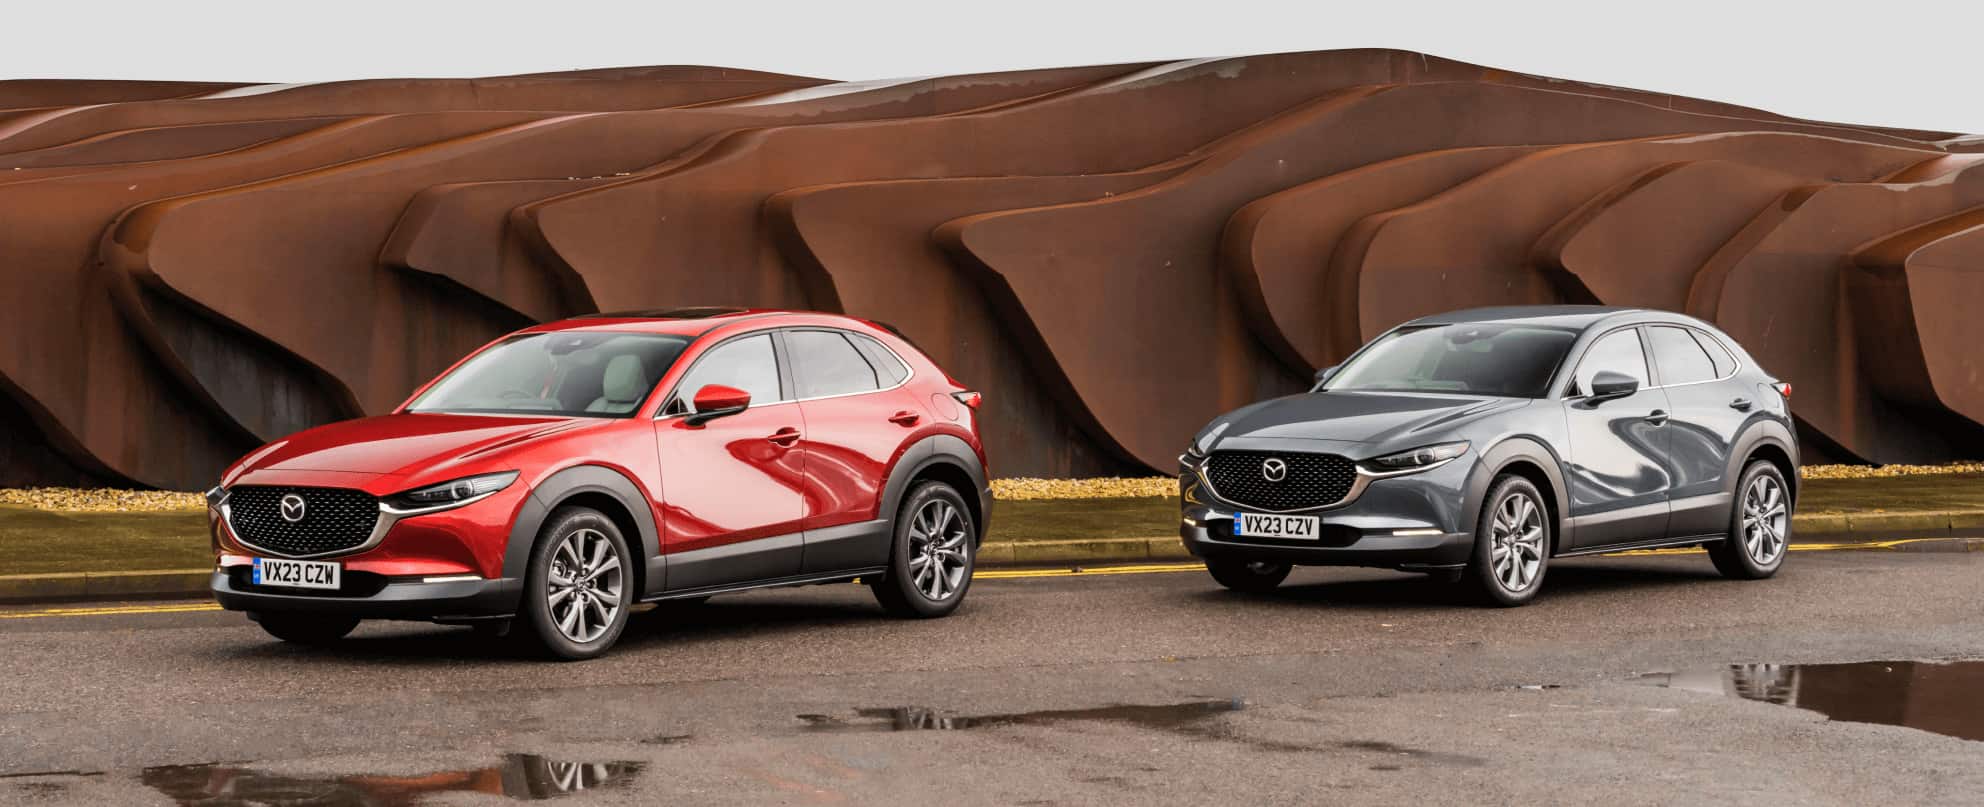 Angled front / side view of Mazda CX-30 skyactiv-G and Mazda CX-30 skyactiv-X parked side by side.